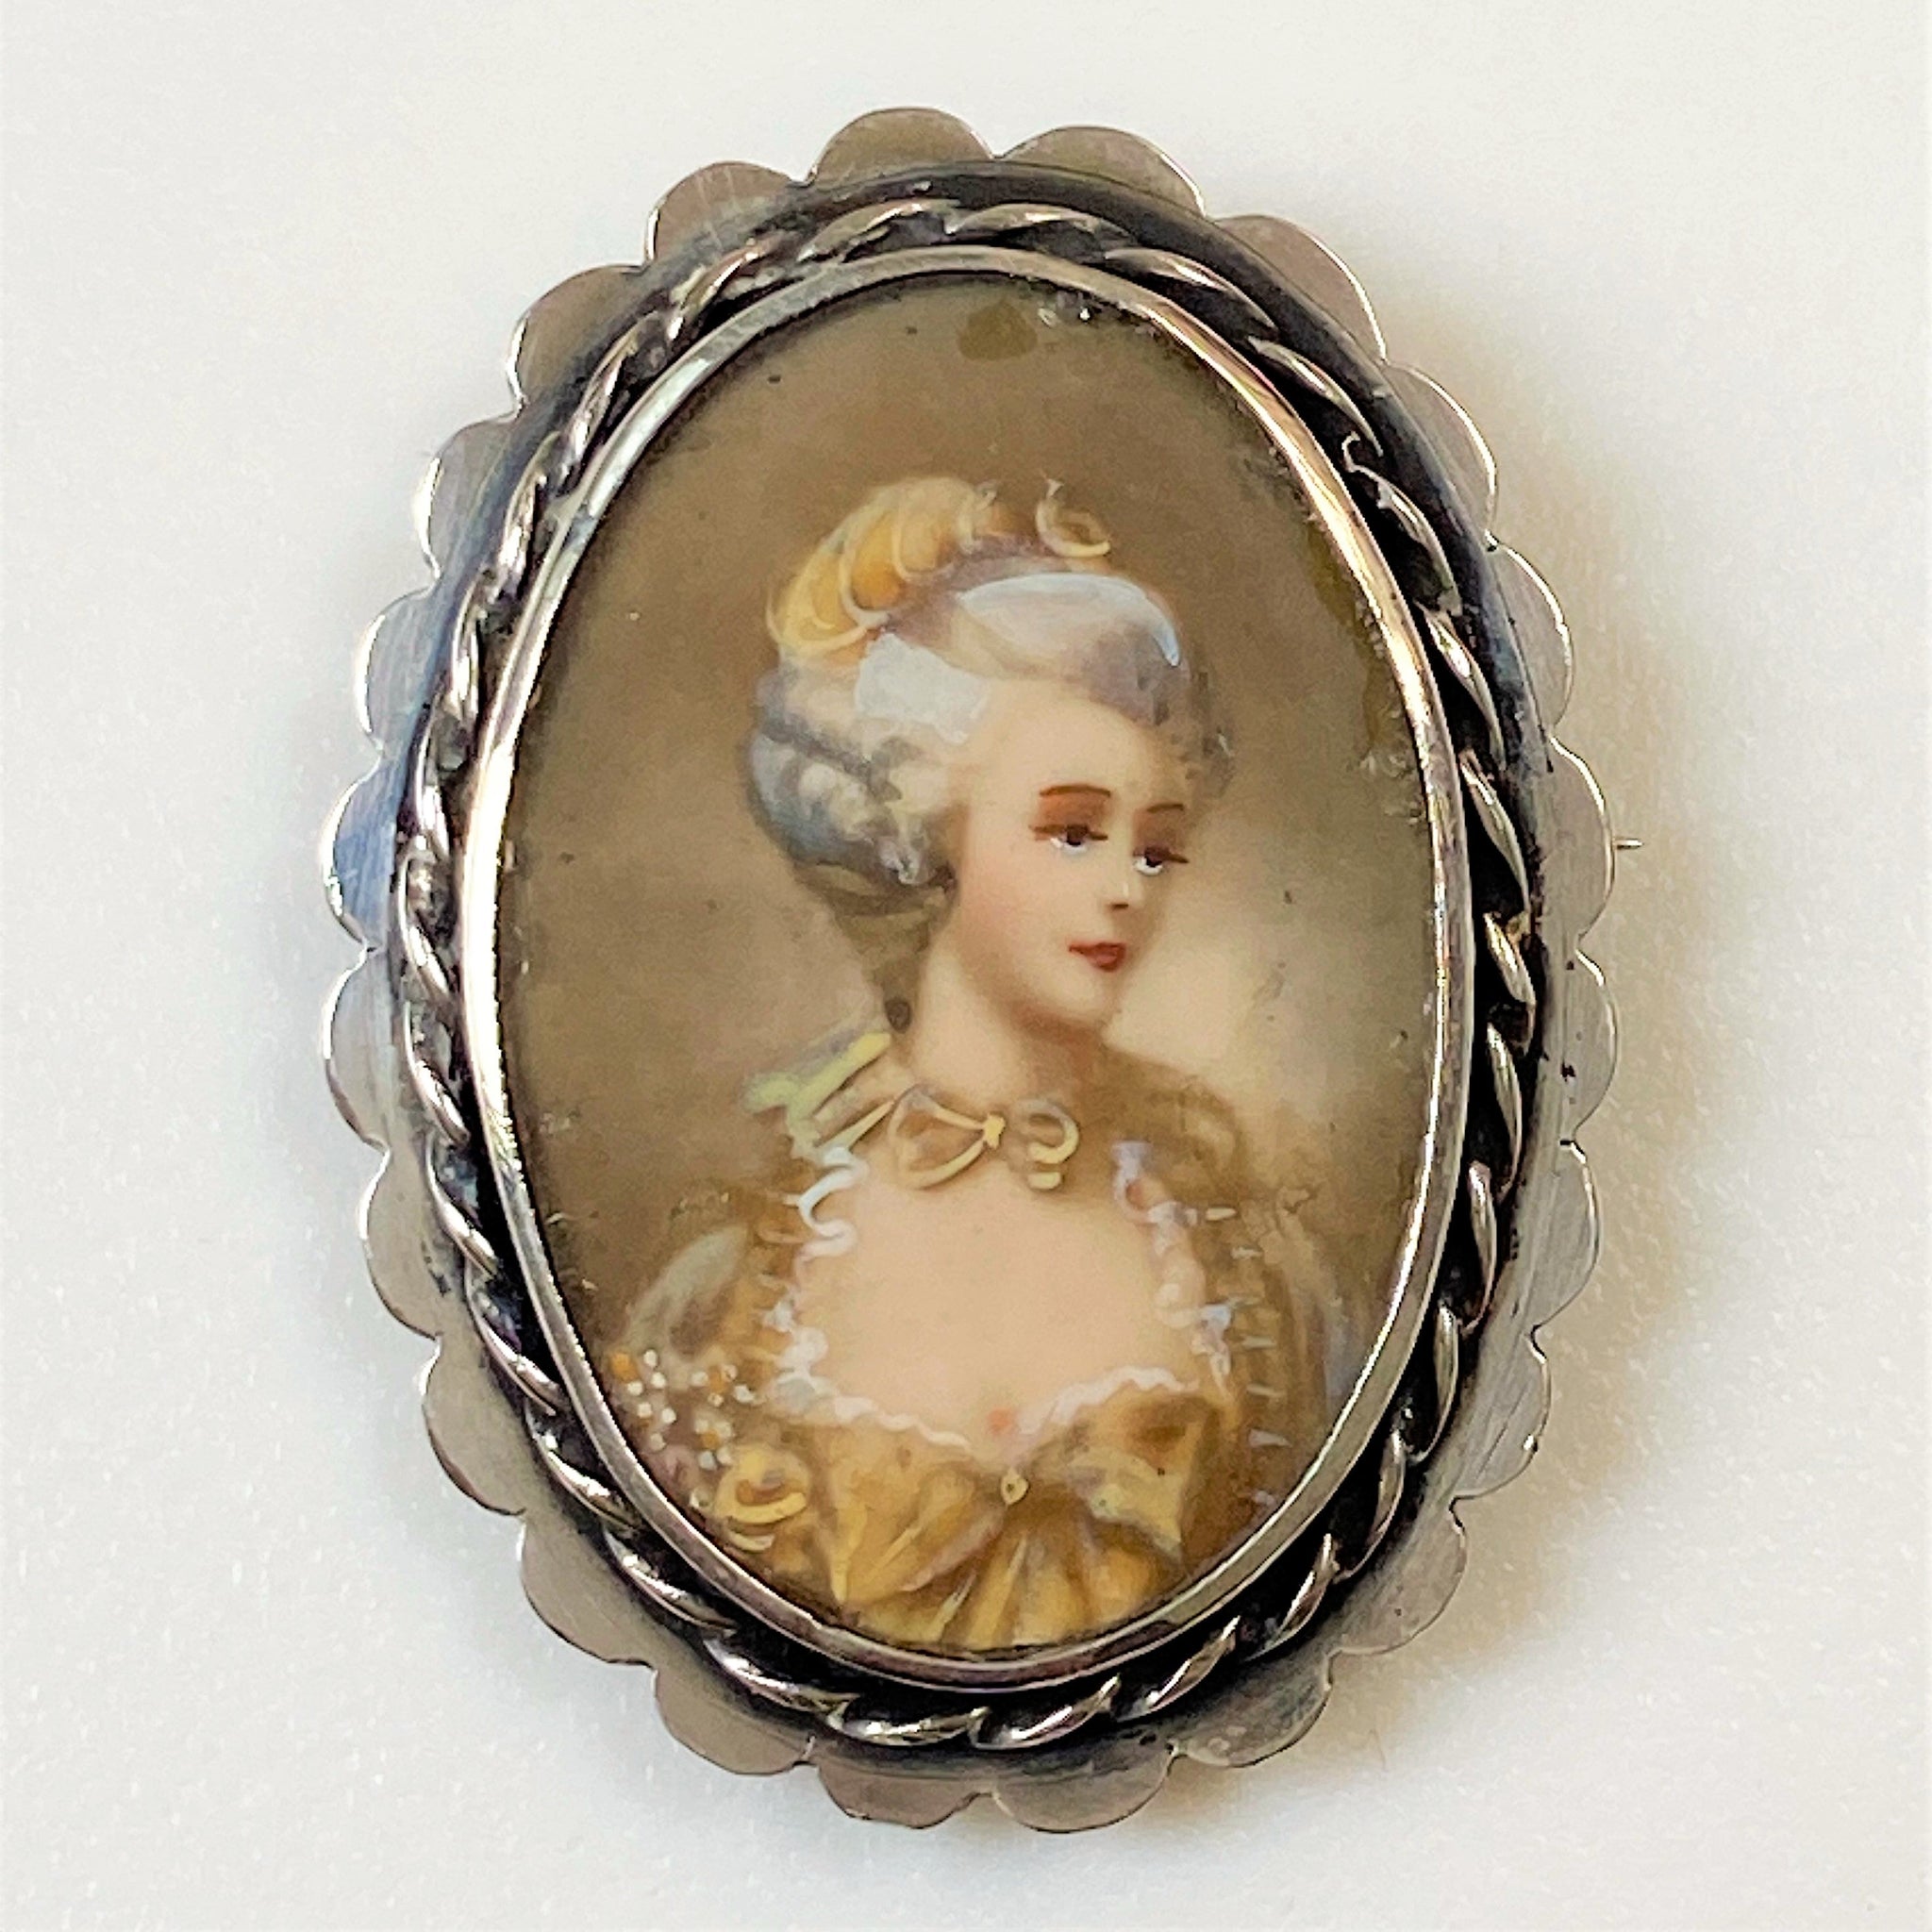 Vintage Silver Oval Brooch with Miniature of a Lady